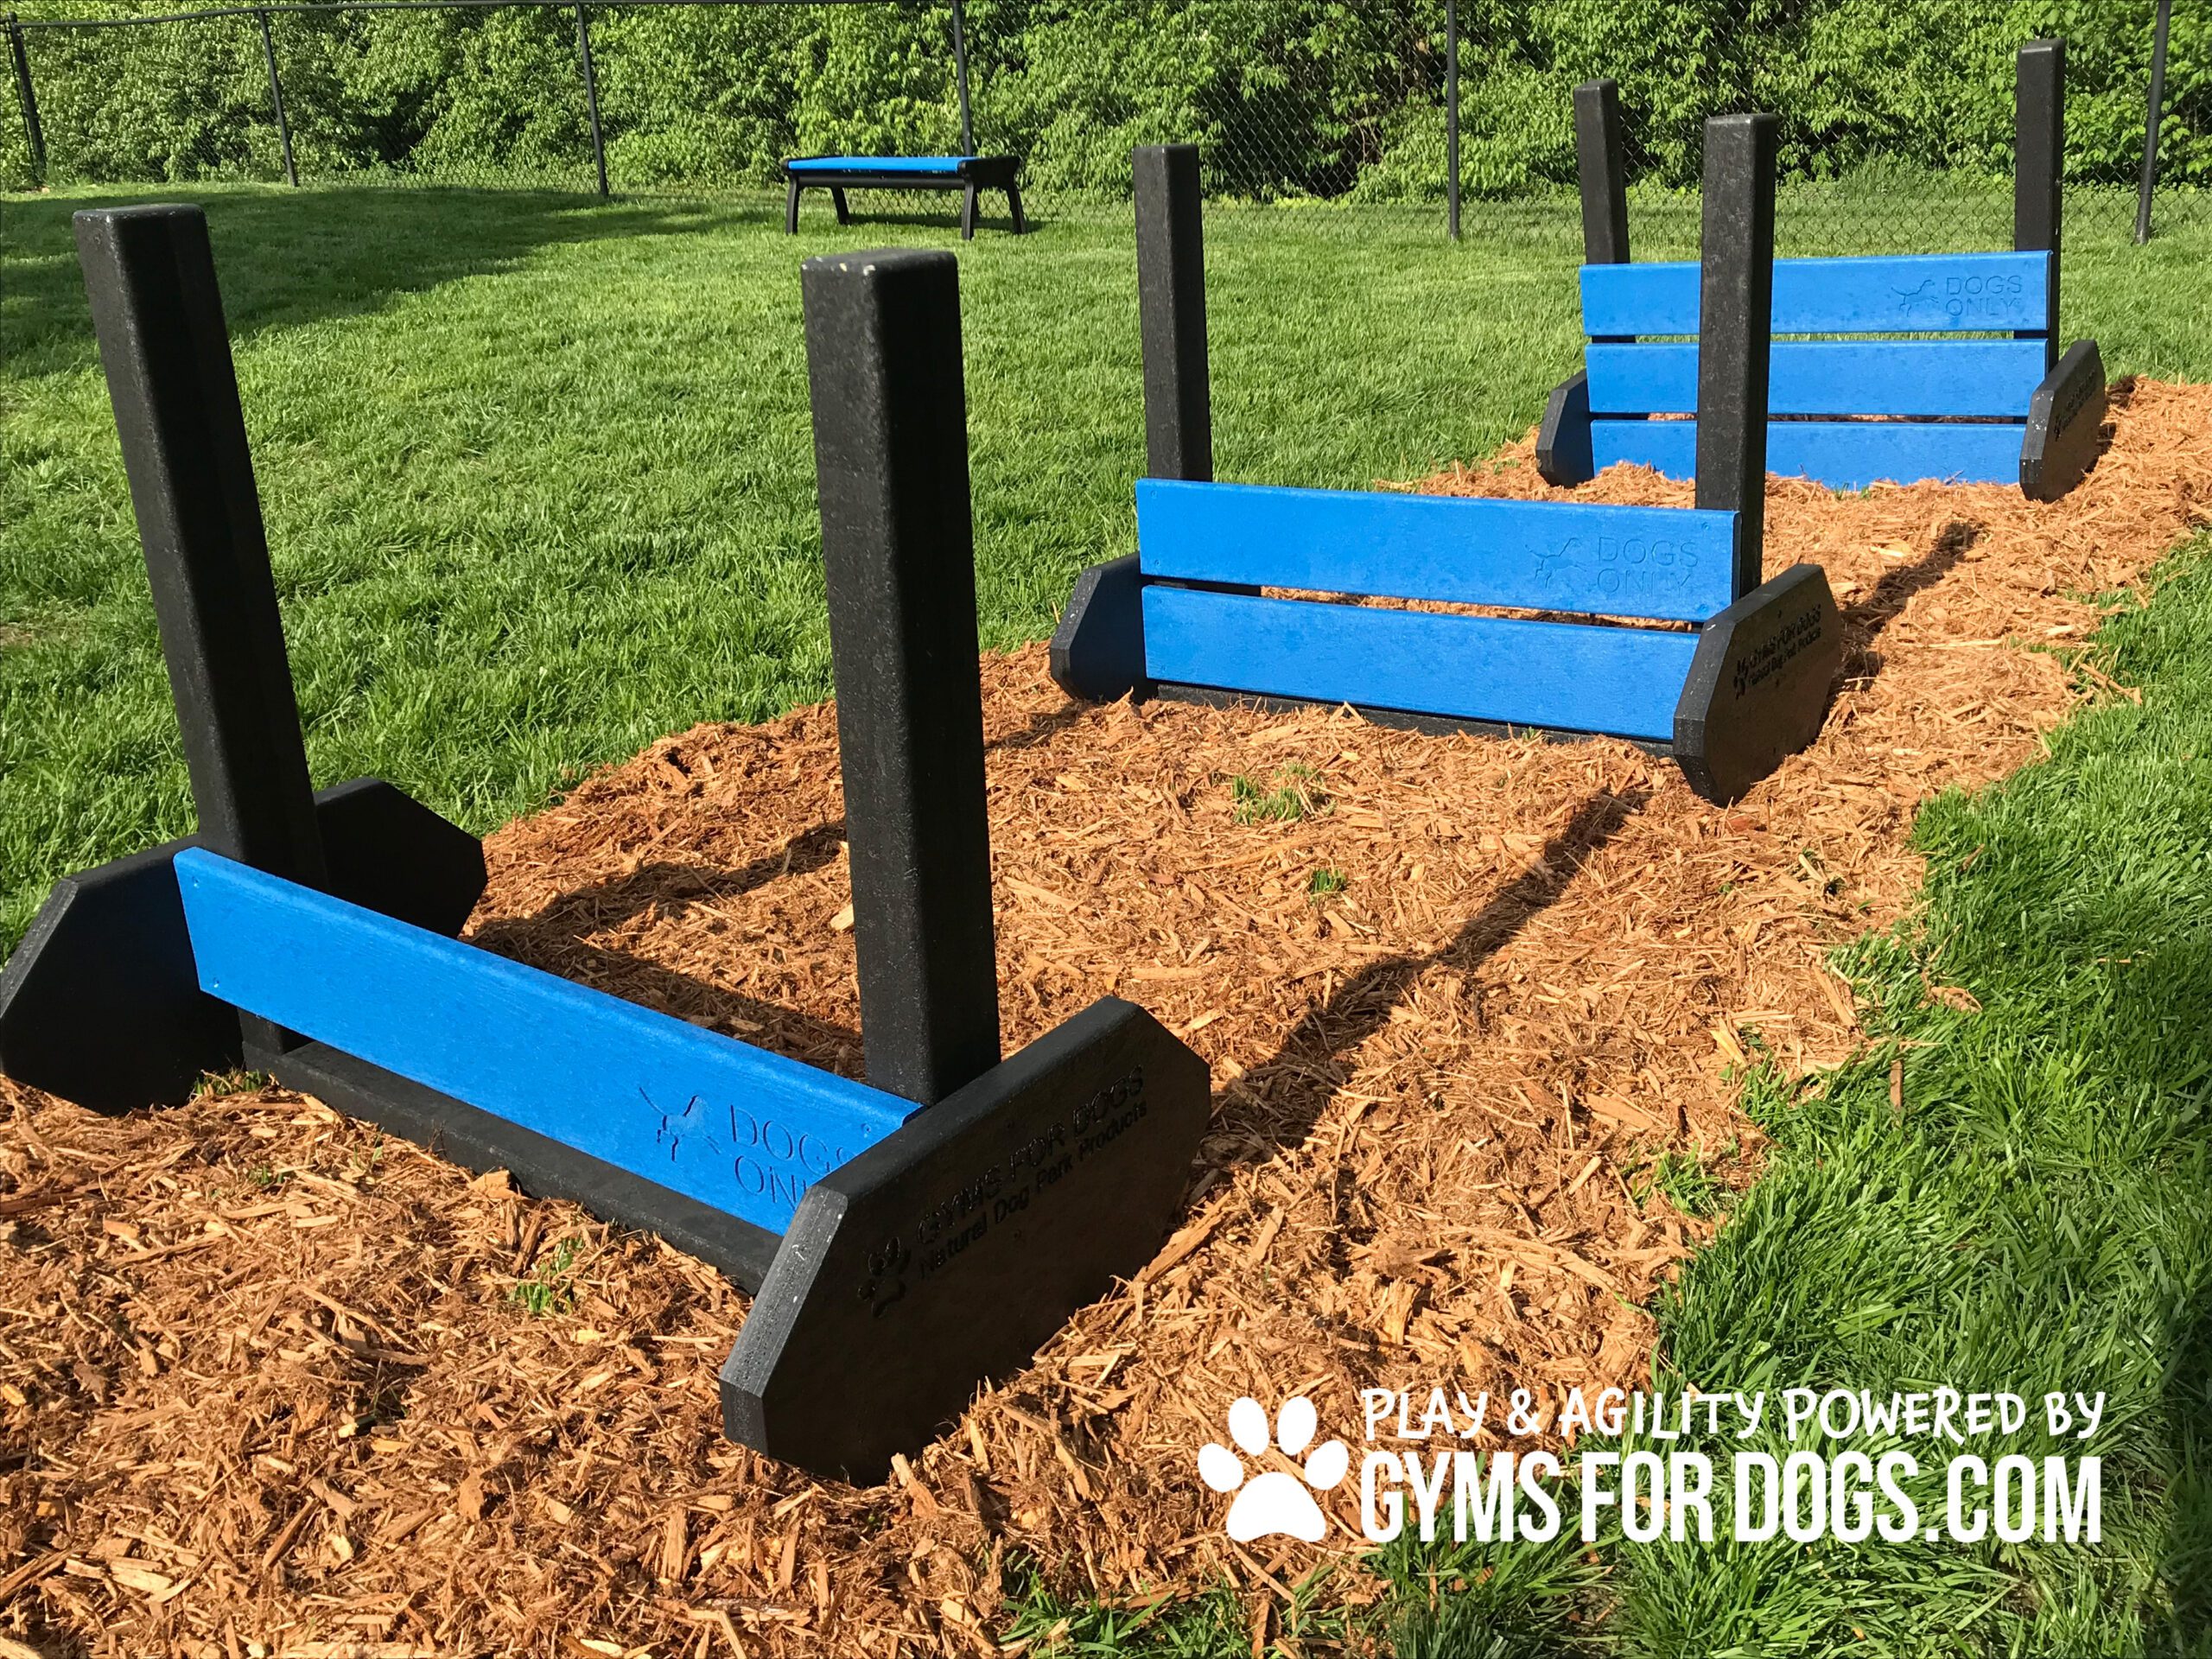 Dog Park Products